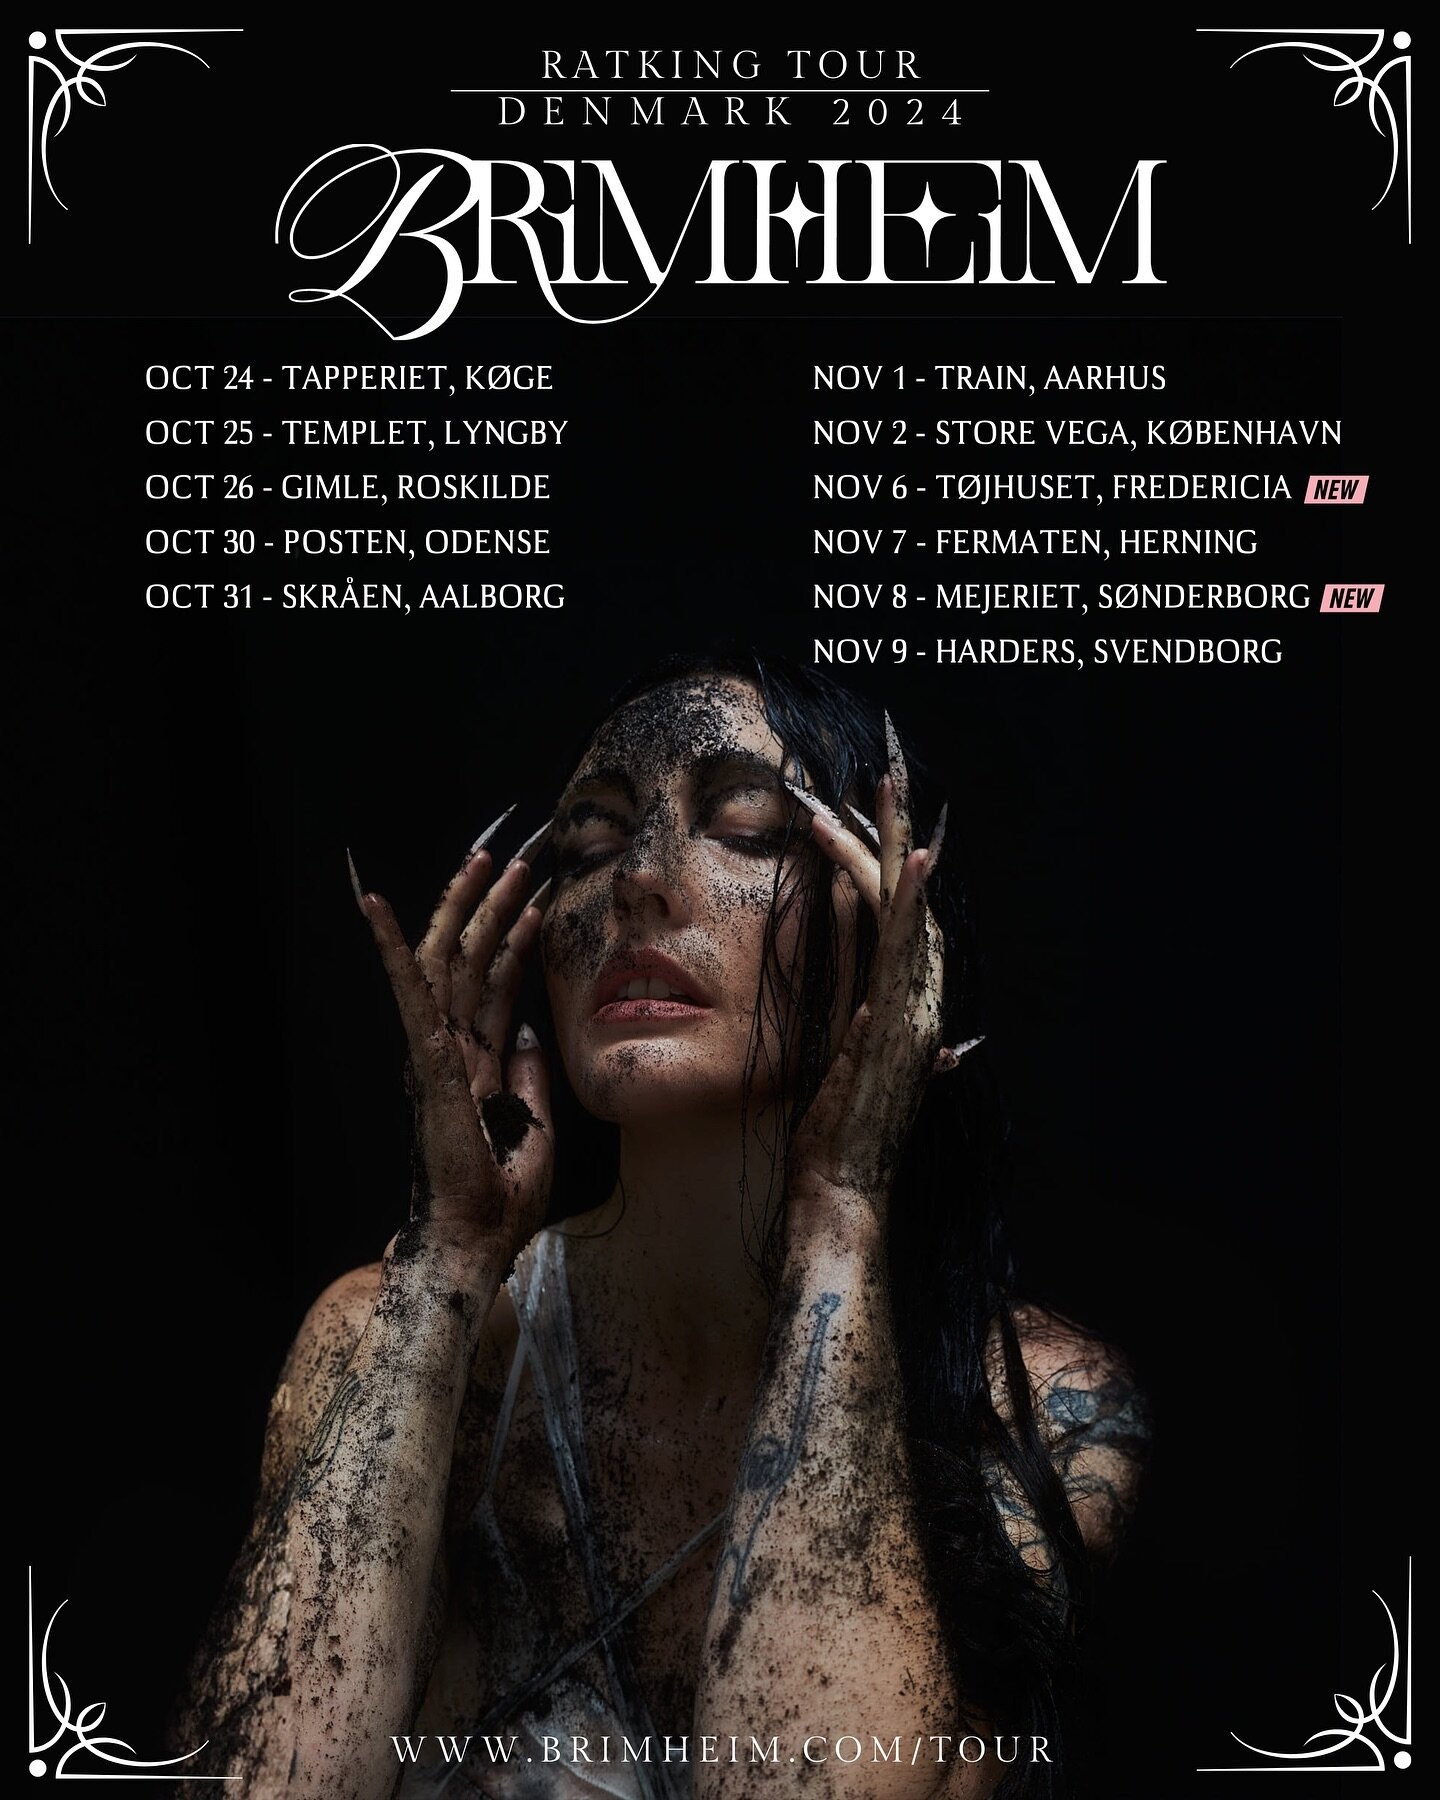 We&rsquo;ve added S&oslash;nderborg and Fredericia to the DK tour! 

Tour will include my career&rsquo;s biggest venue concert at Store Vega which is a real girl dream come true. 🥀🪻

These shows are gonna be special so go on and secure your spot at